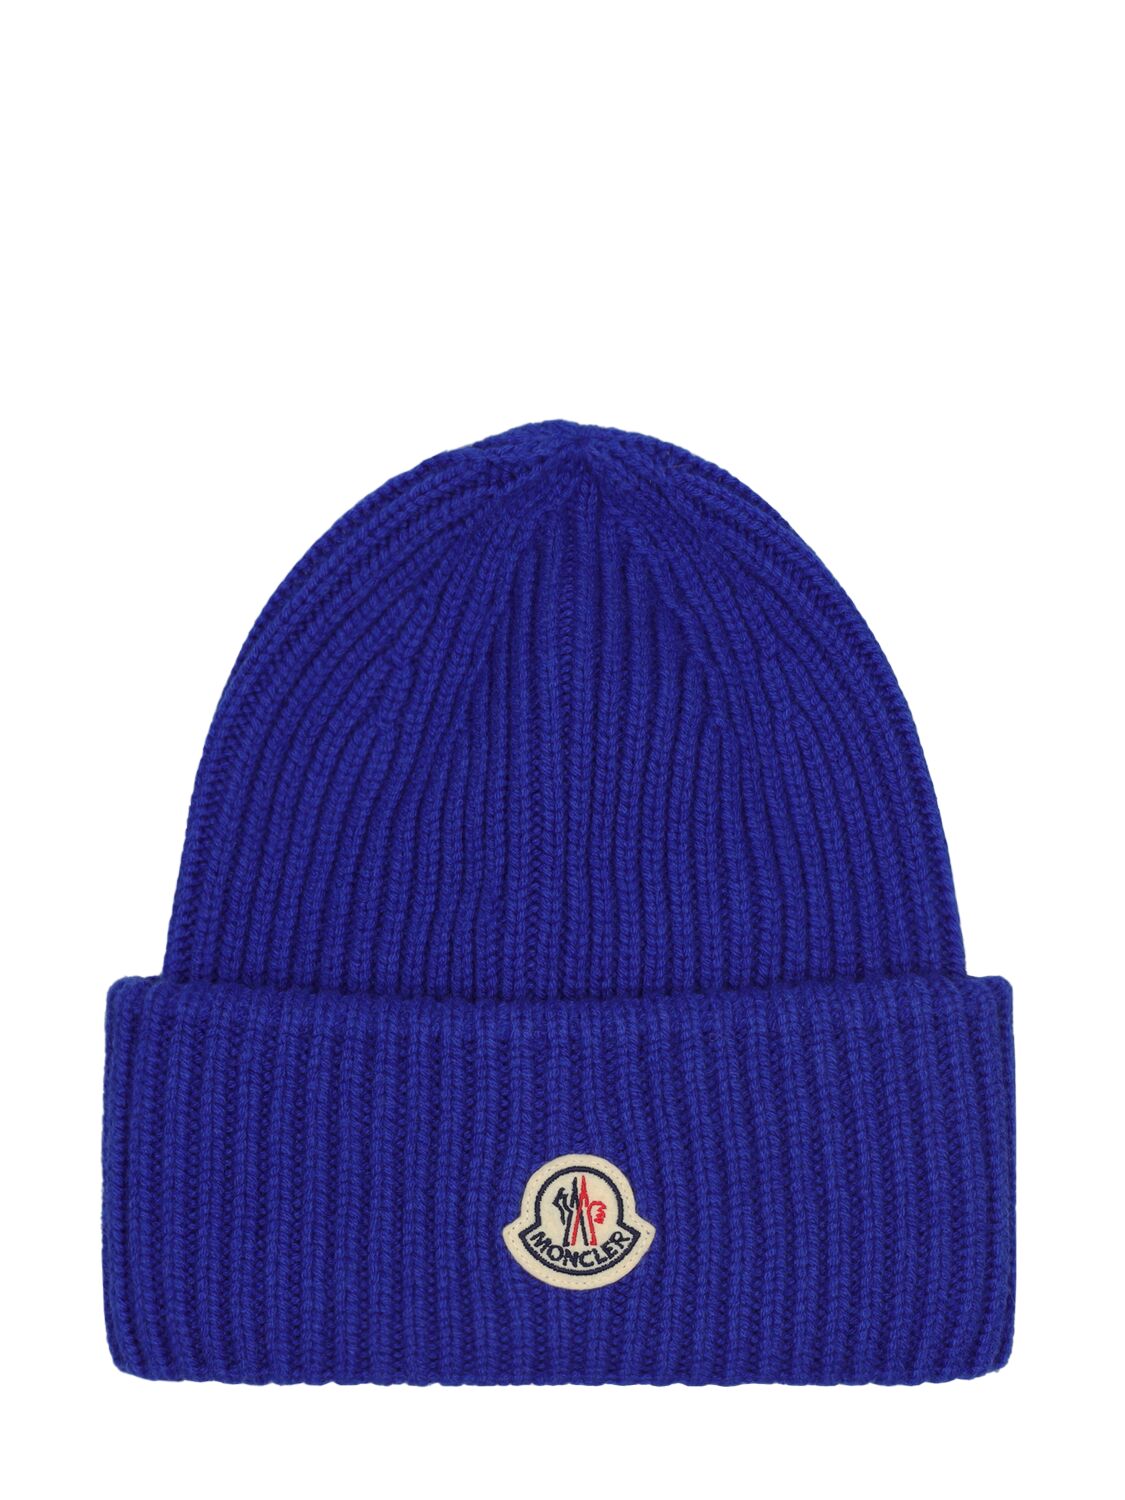 Moncler Electric Blue Wool Blend Beanie Hat